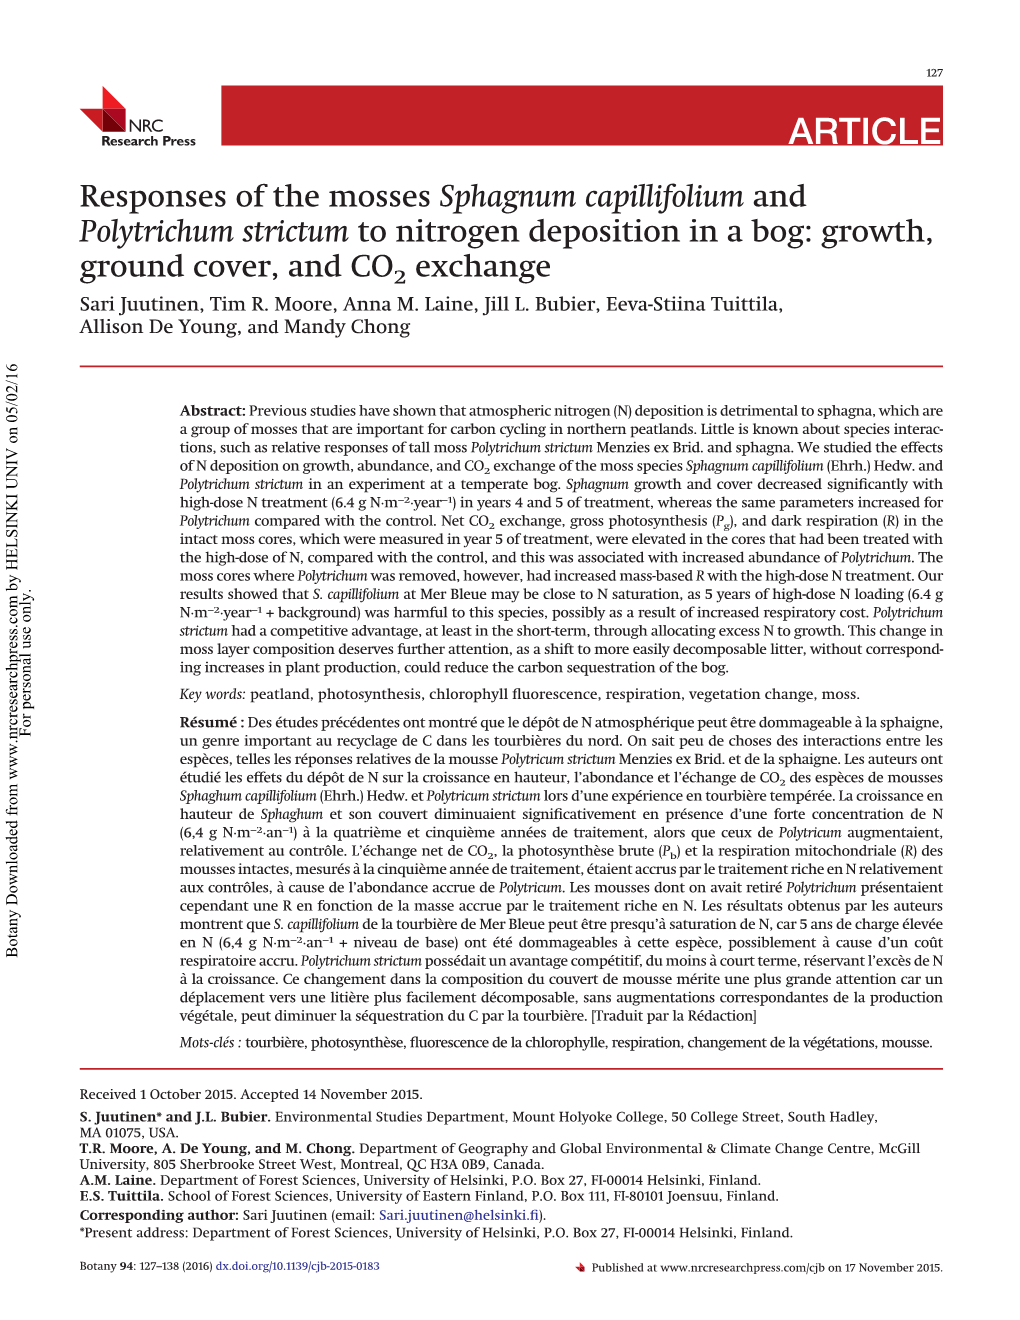 Responses of the Mosses Sphagnum Capillifolium and Polytrichum Strictum to Nitrogen Deposition in a Bog: Growth, Ground Cover, and CO2 Exchange Sari Juutinen, Tim R